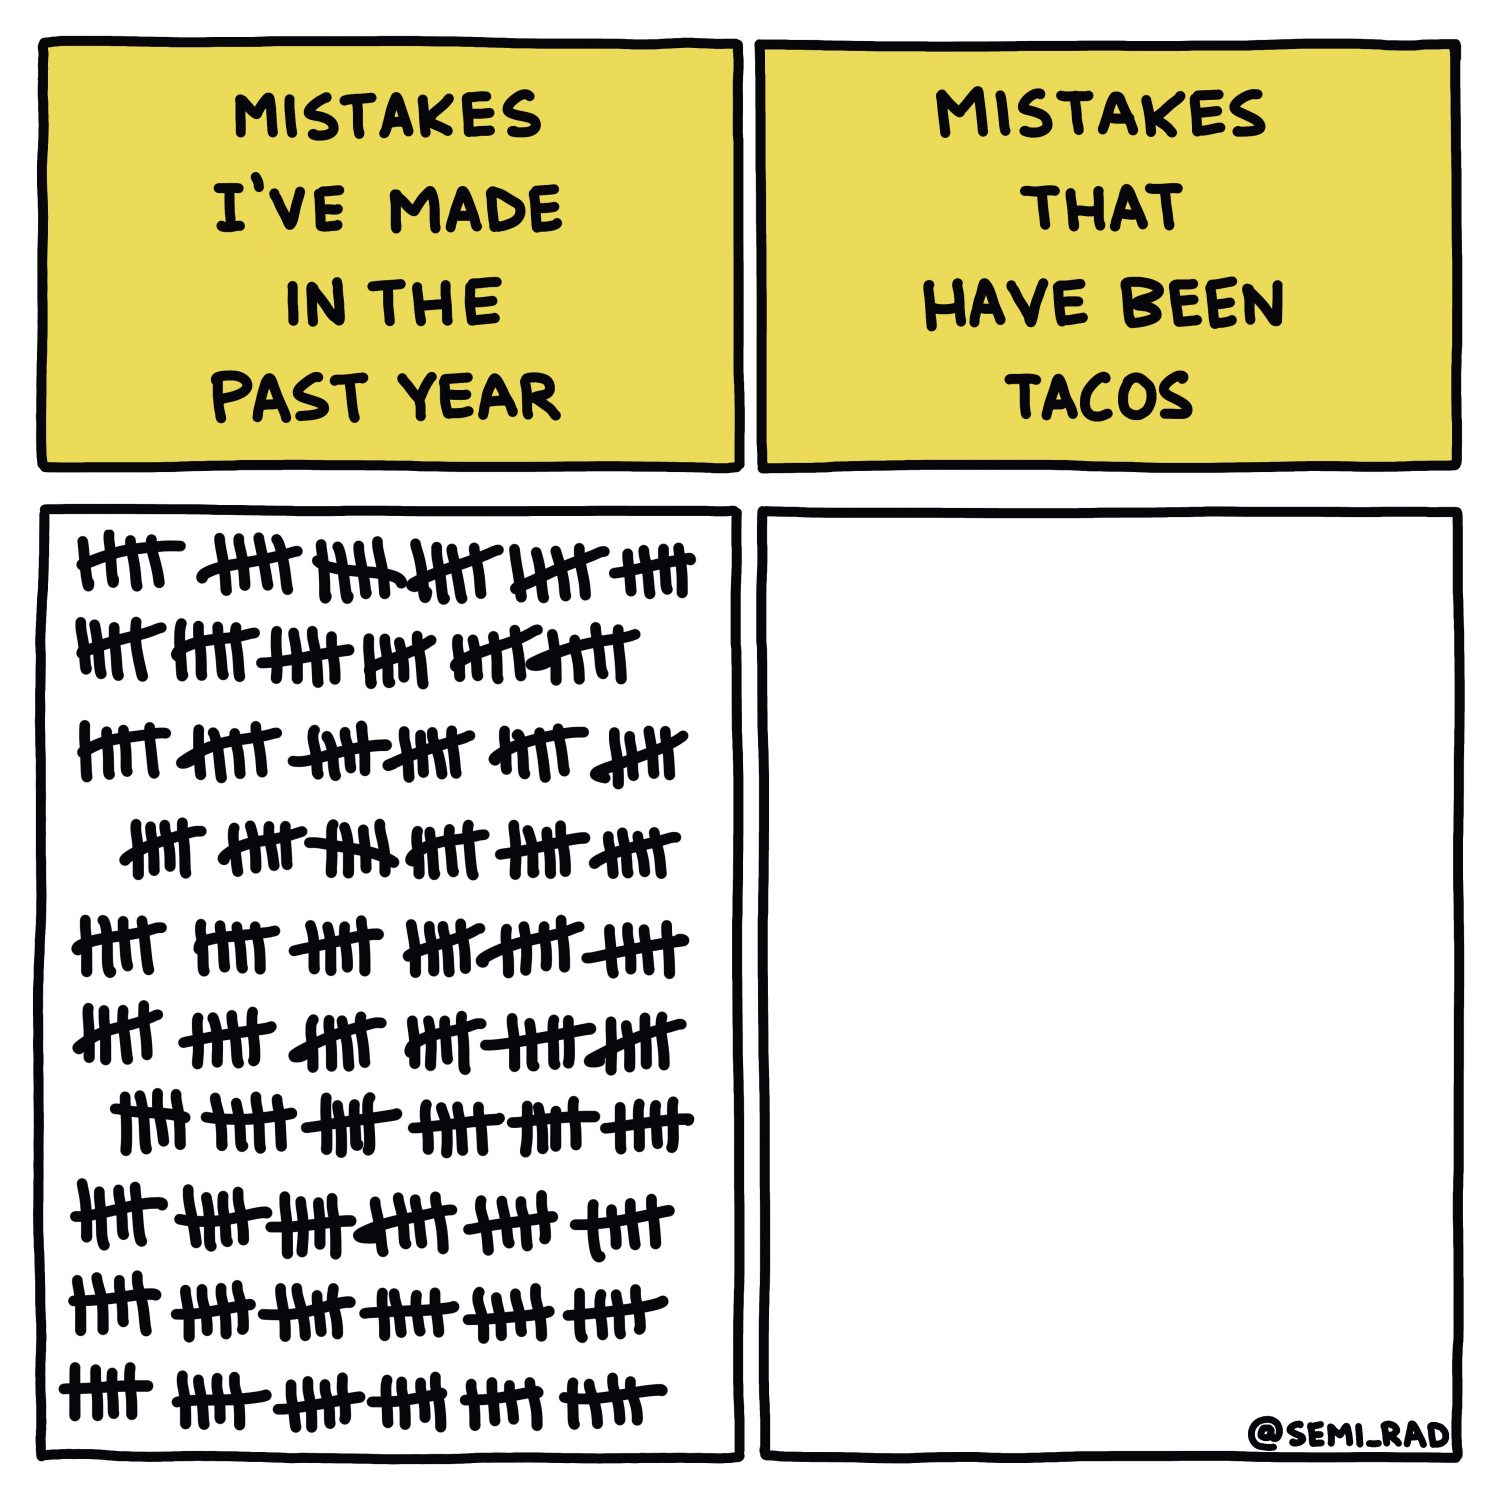 Mistakes and Tacos